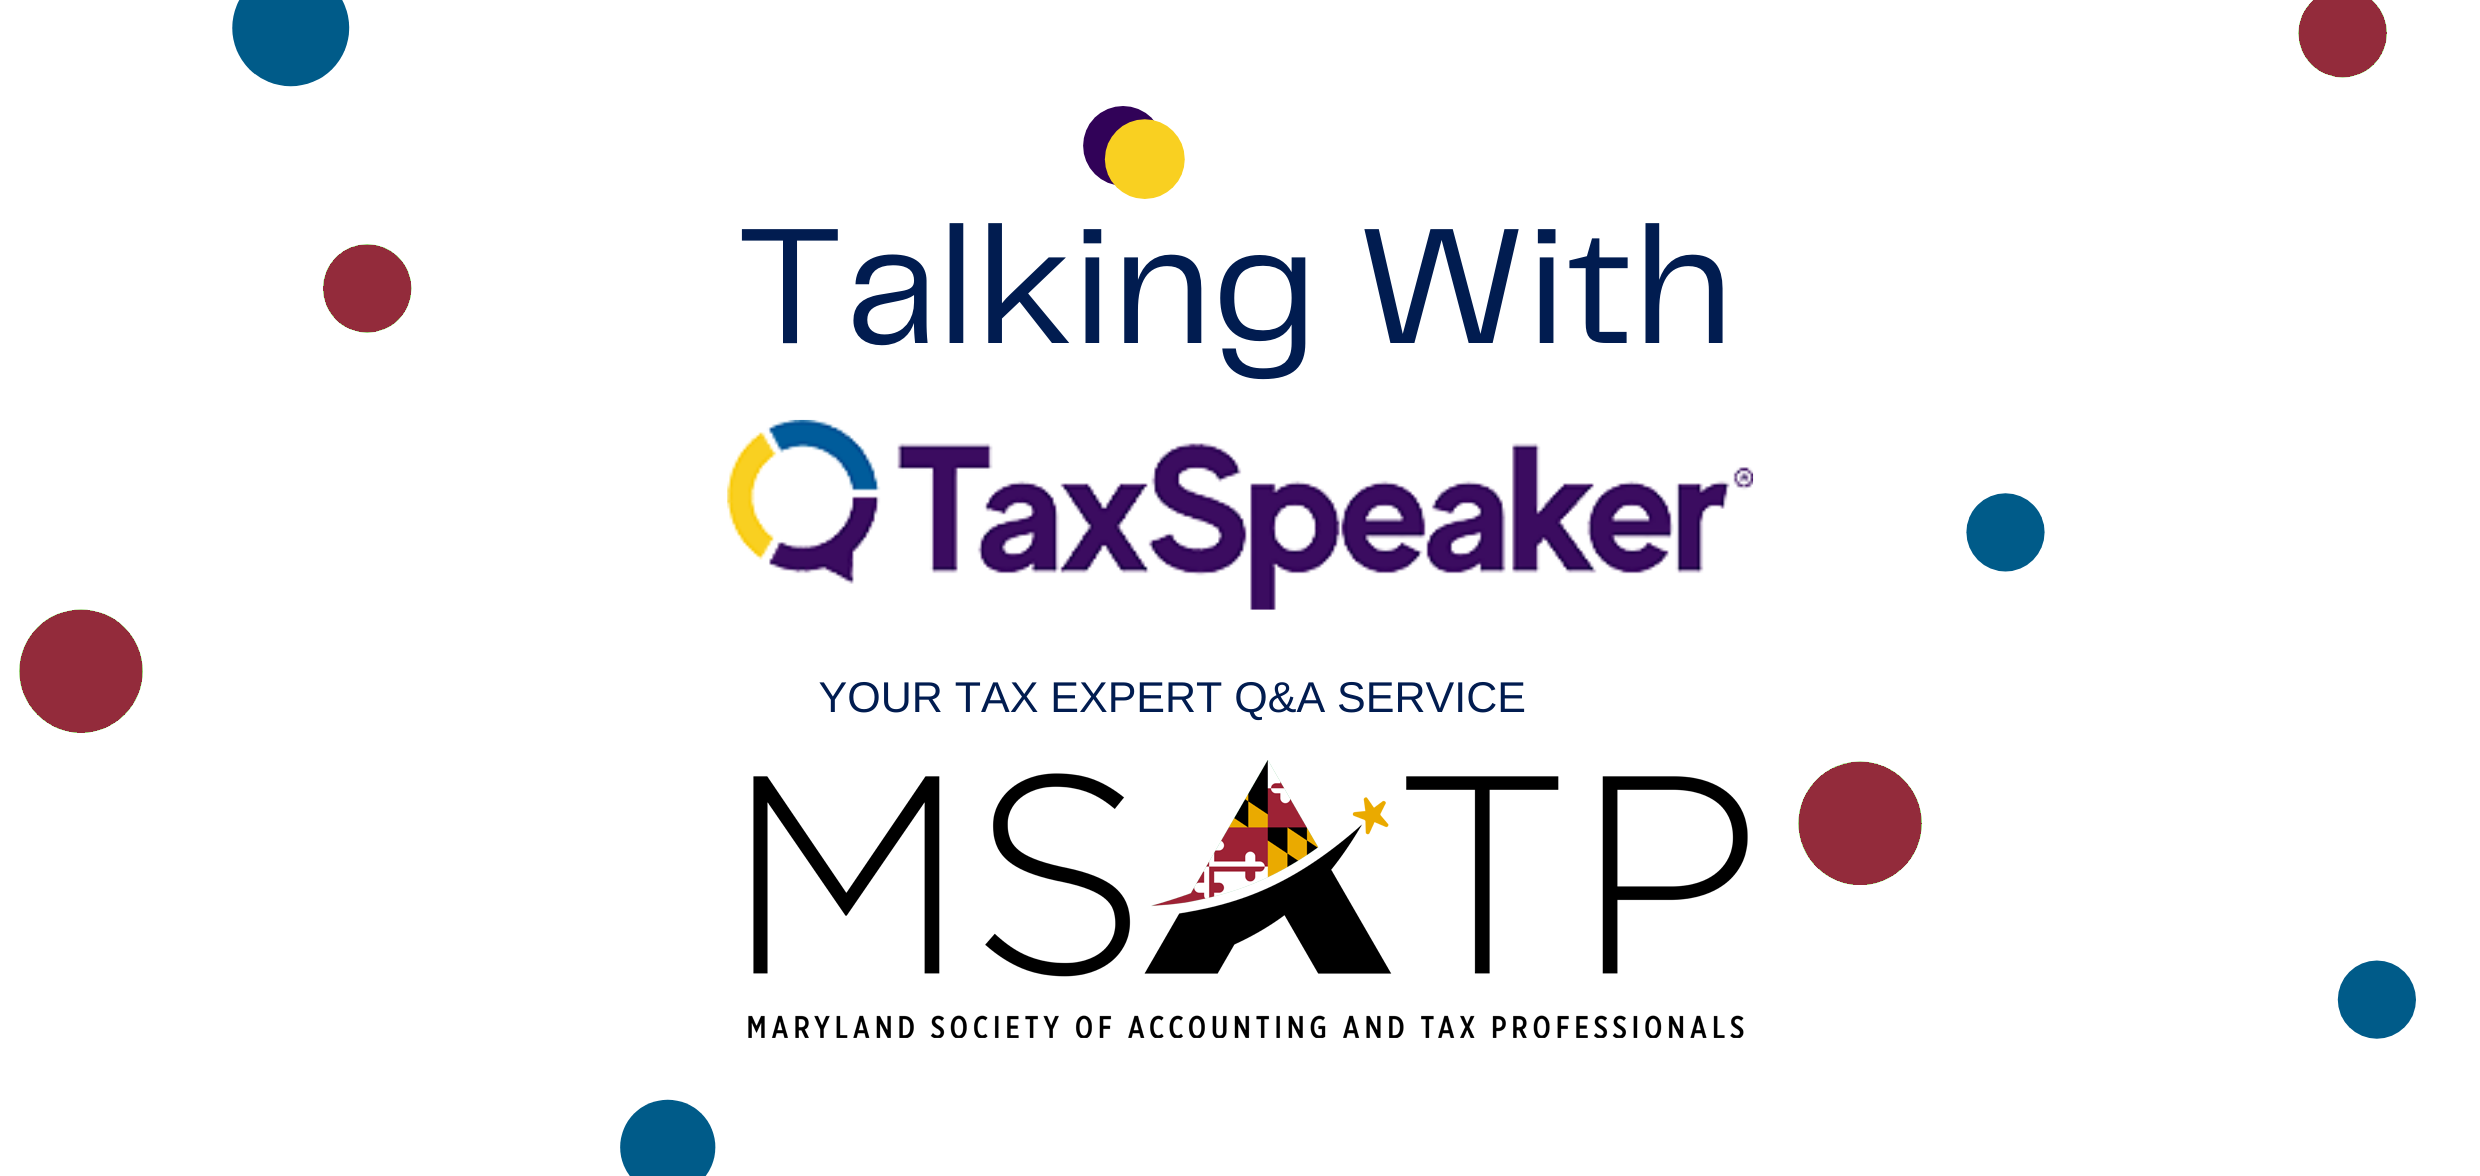 Talking with TaxSpeaker *MEMBER ONLY*